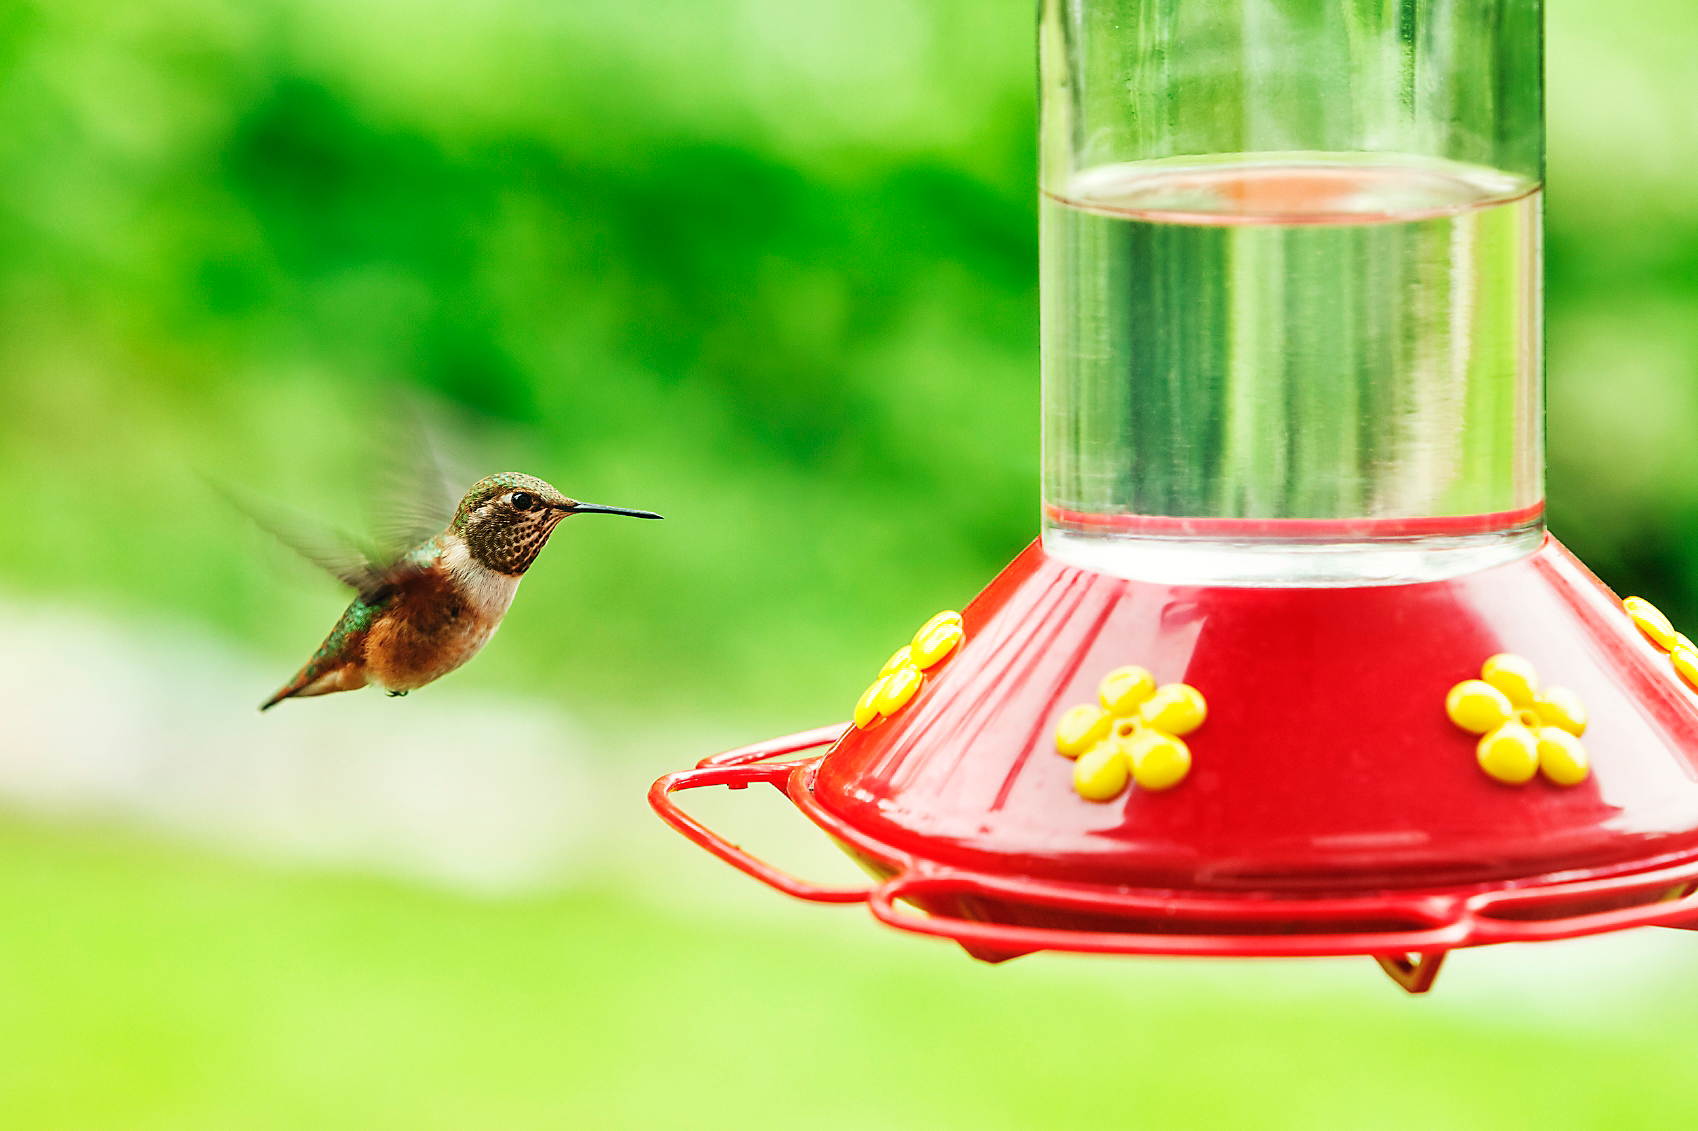 Having trouble with attracting hummingbirds? Change your nectar more often — it could be spoiling.